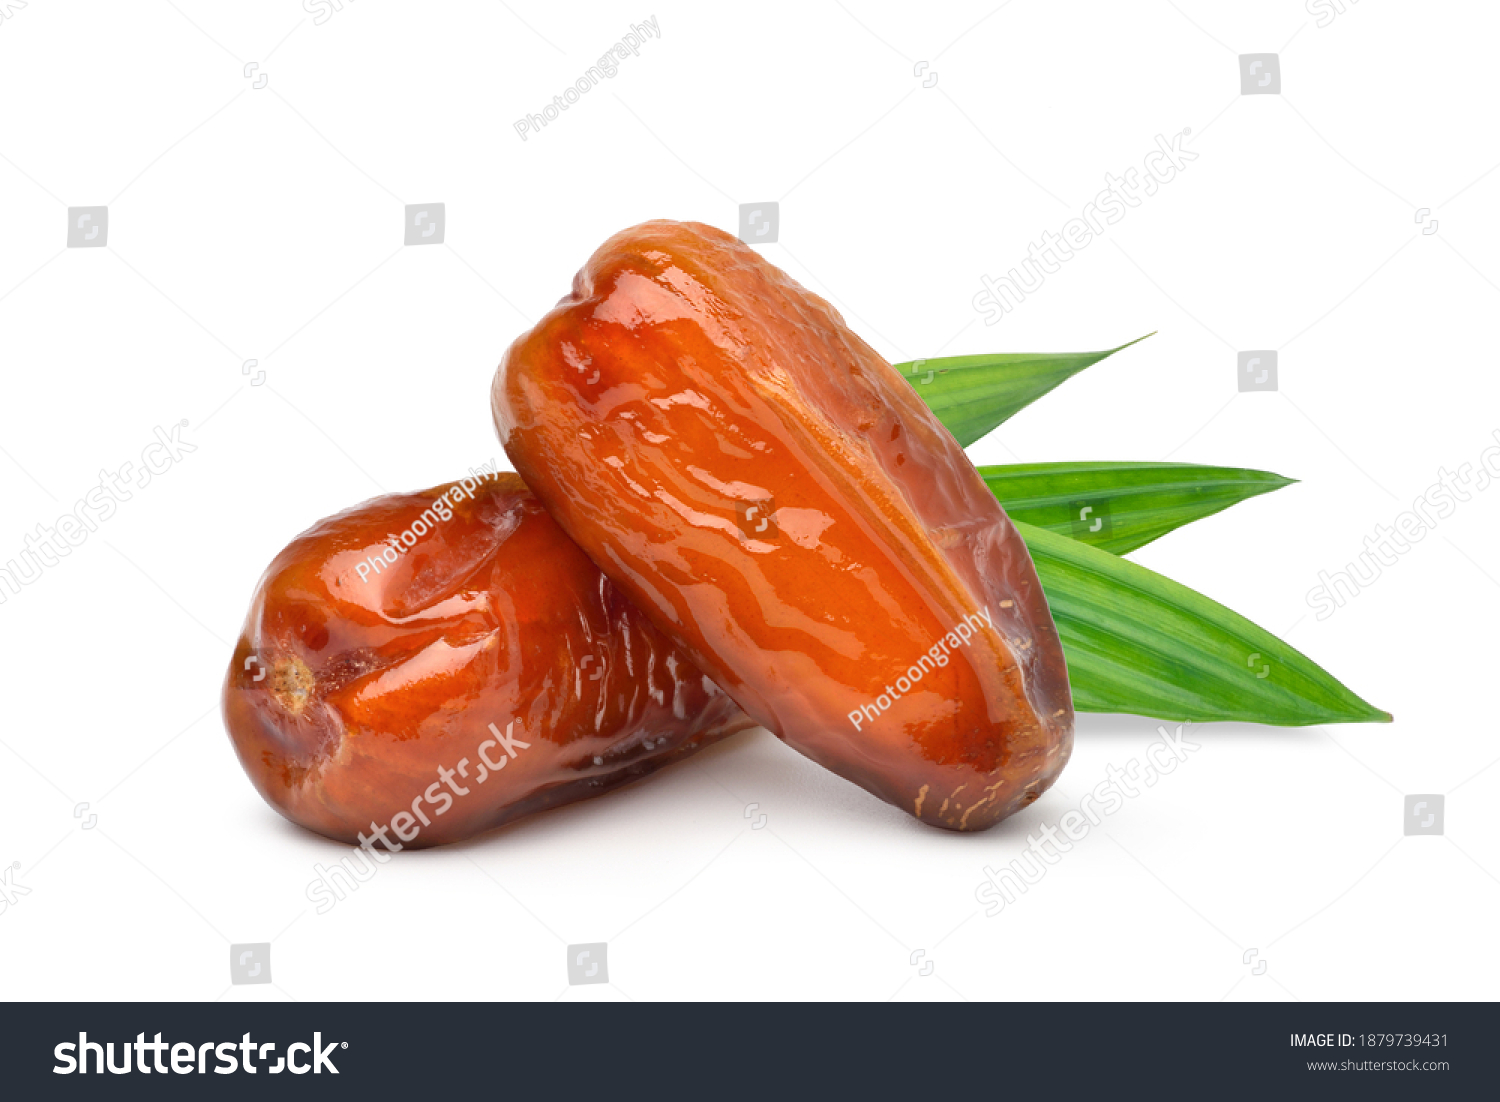 Dried Date palm fruits with green leaf isolate on white background. #1879739431